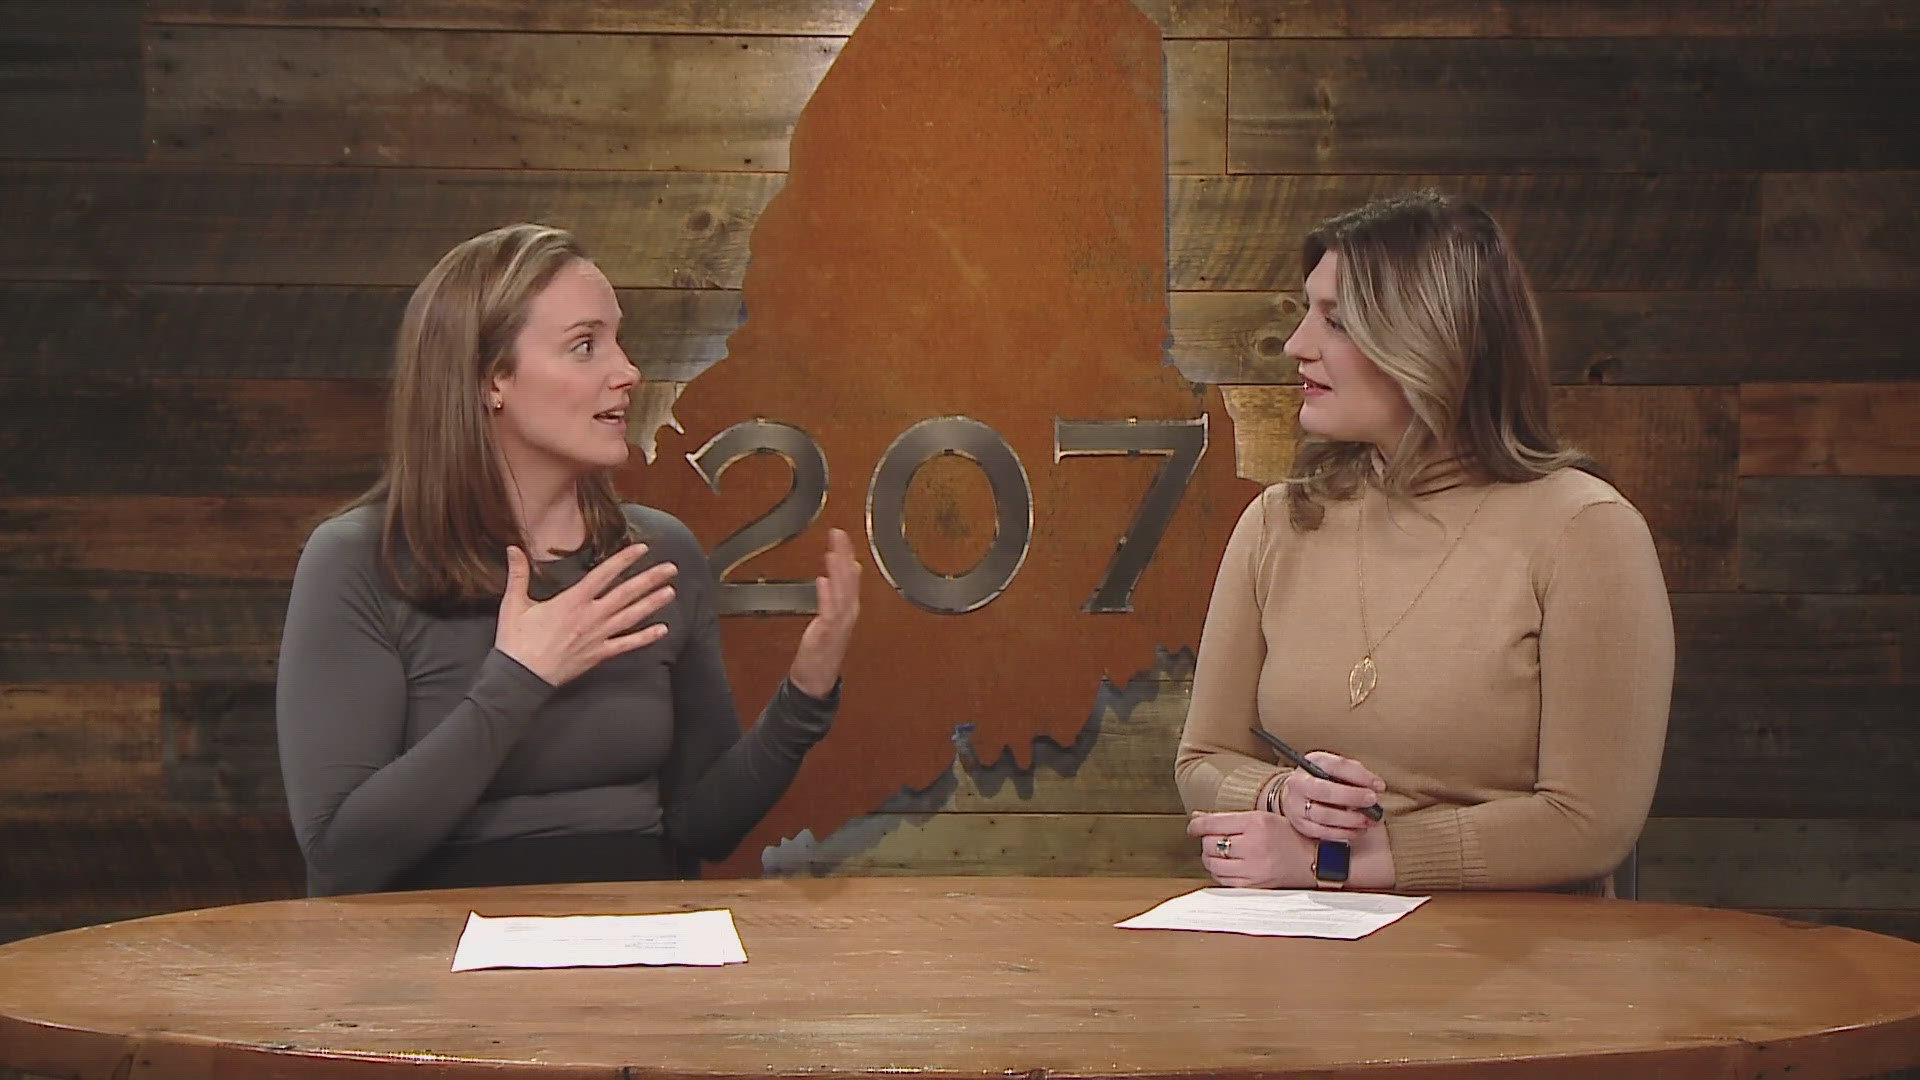 Dr. Allyson Coffin stopped by the 207 studio to share tips about preventing aches and pains while organizing your home.